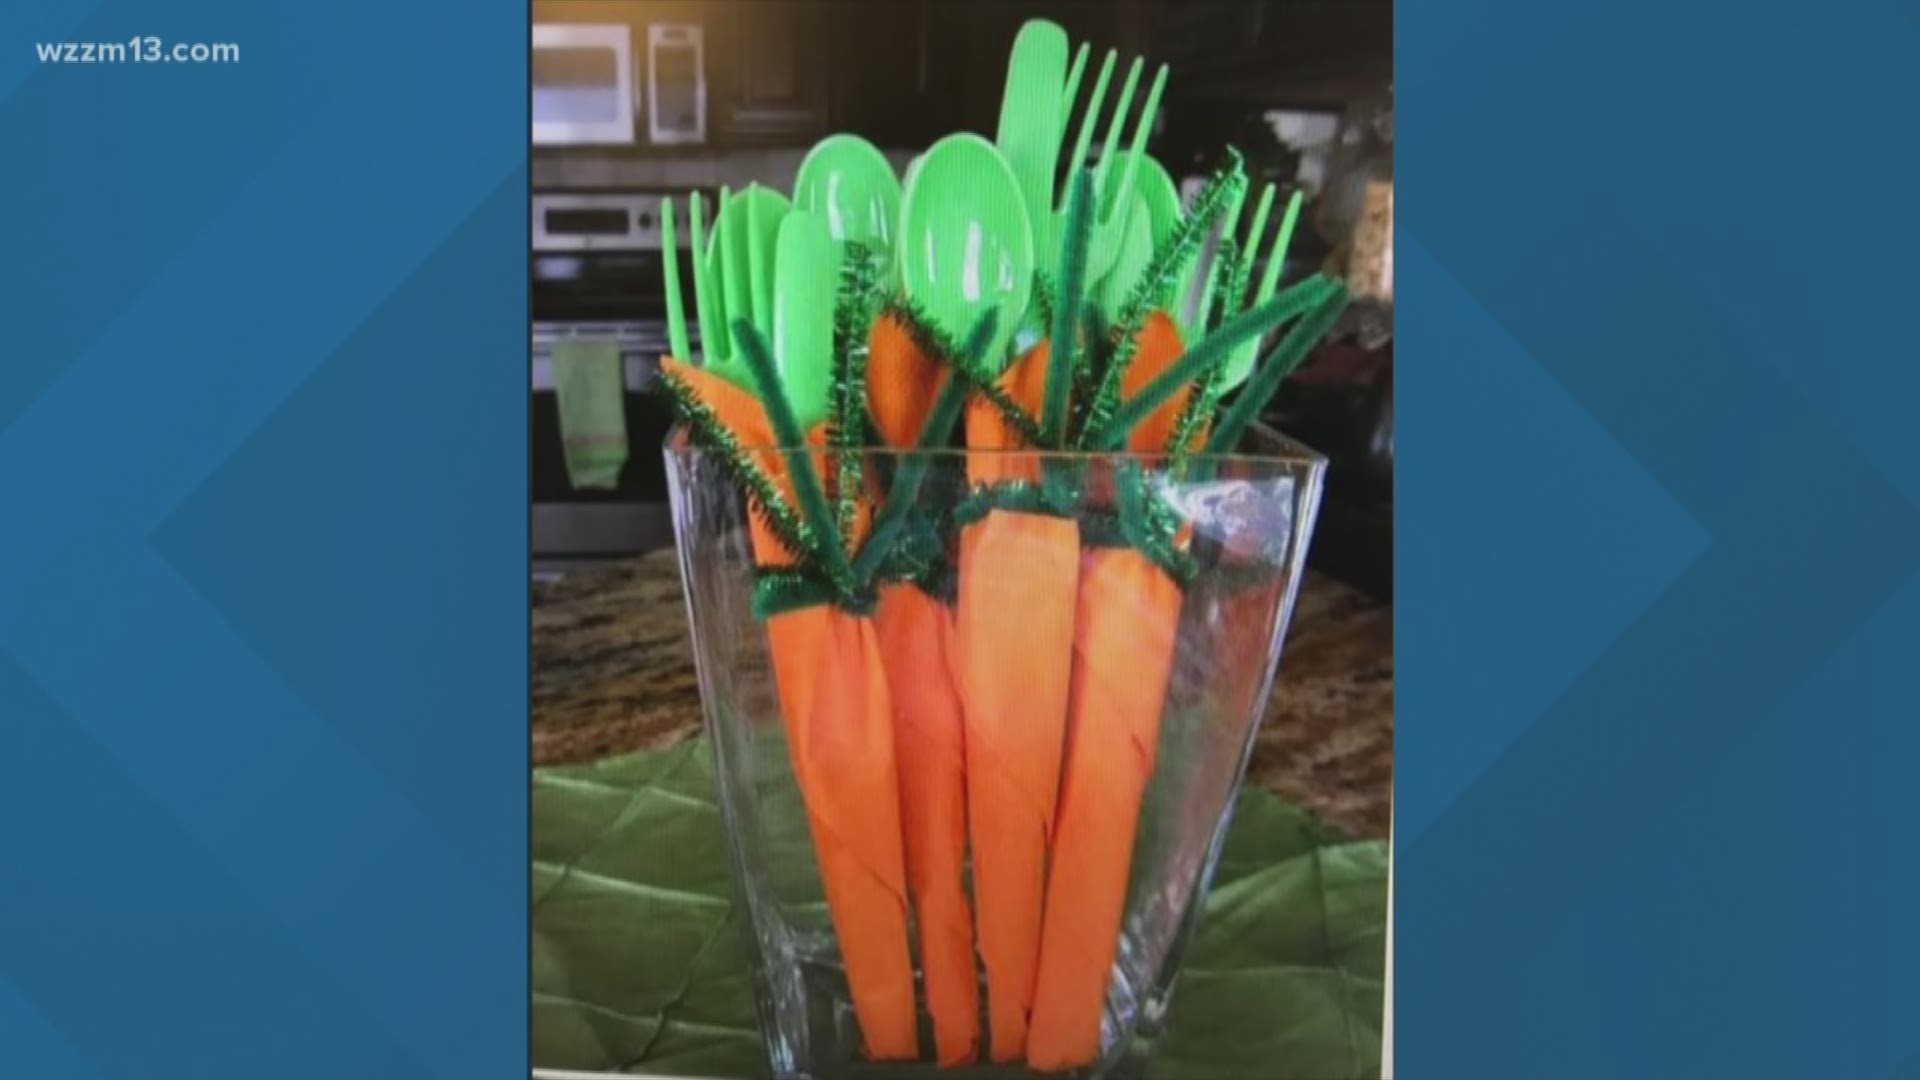 Val shares a really cute and easy Easter craft to help you dress up your home for the holiday weekend.